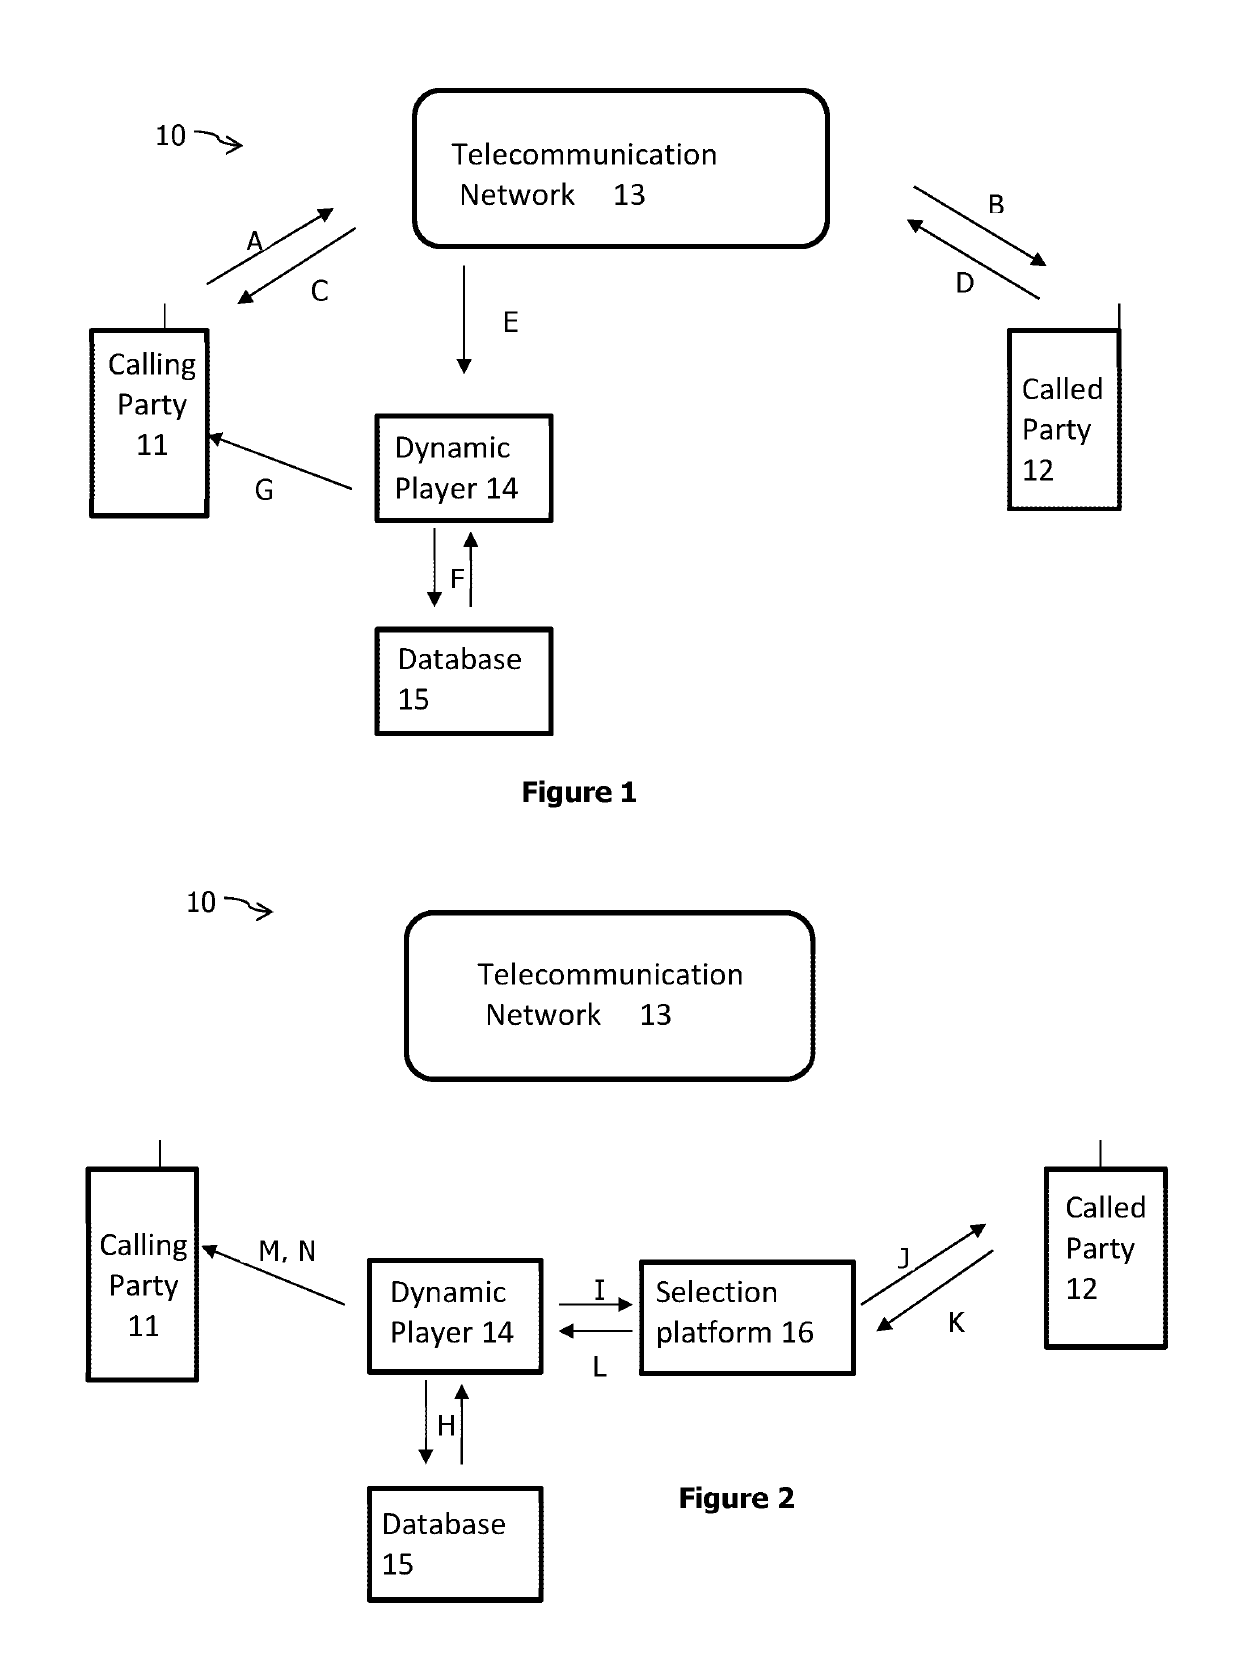 System and method for effectuating real-time shaped data transfer during call setup procedure in a telecommunication network